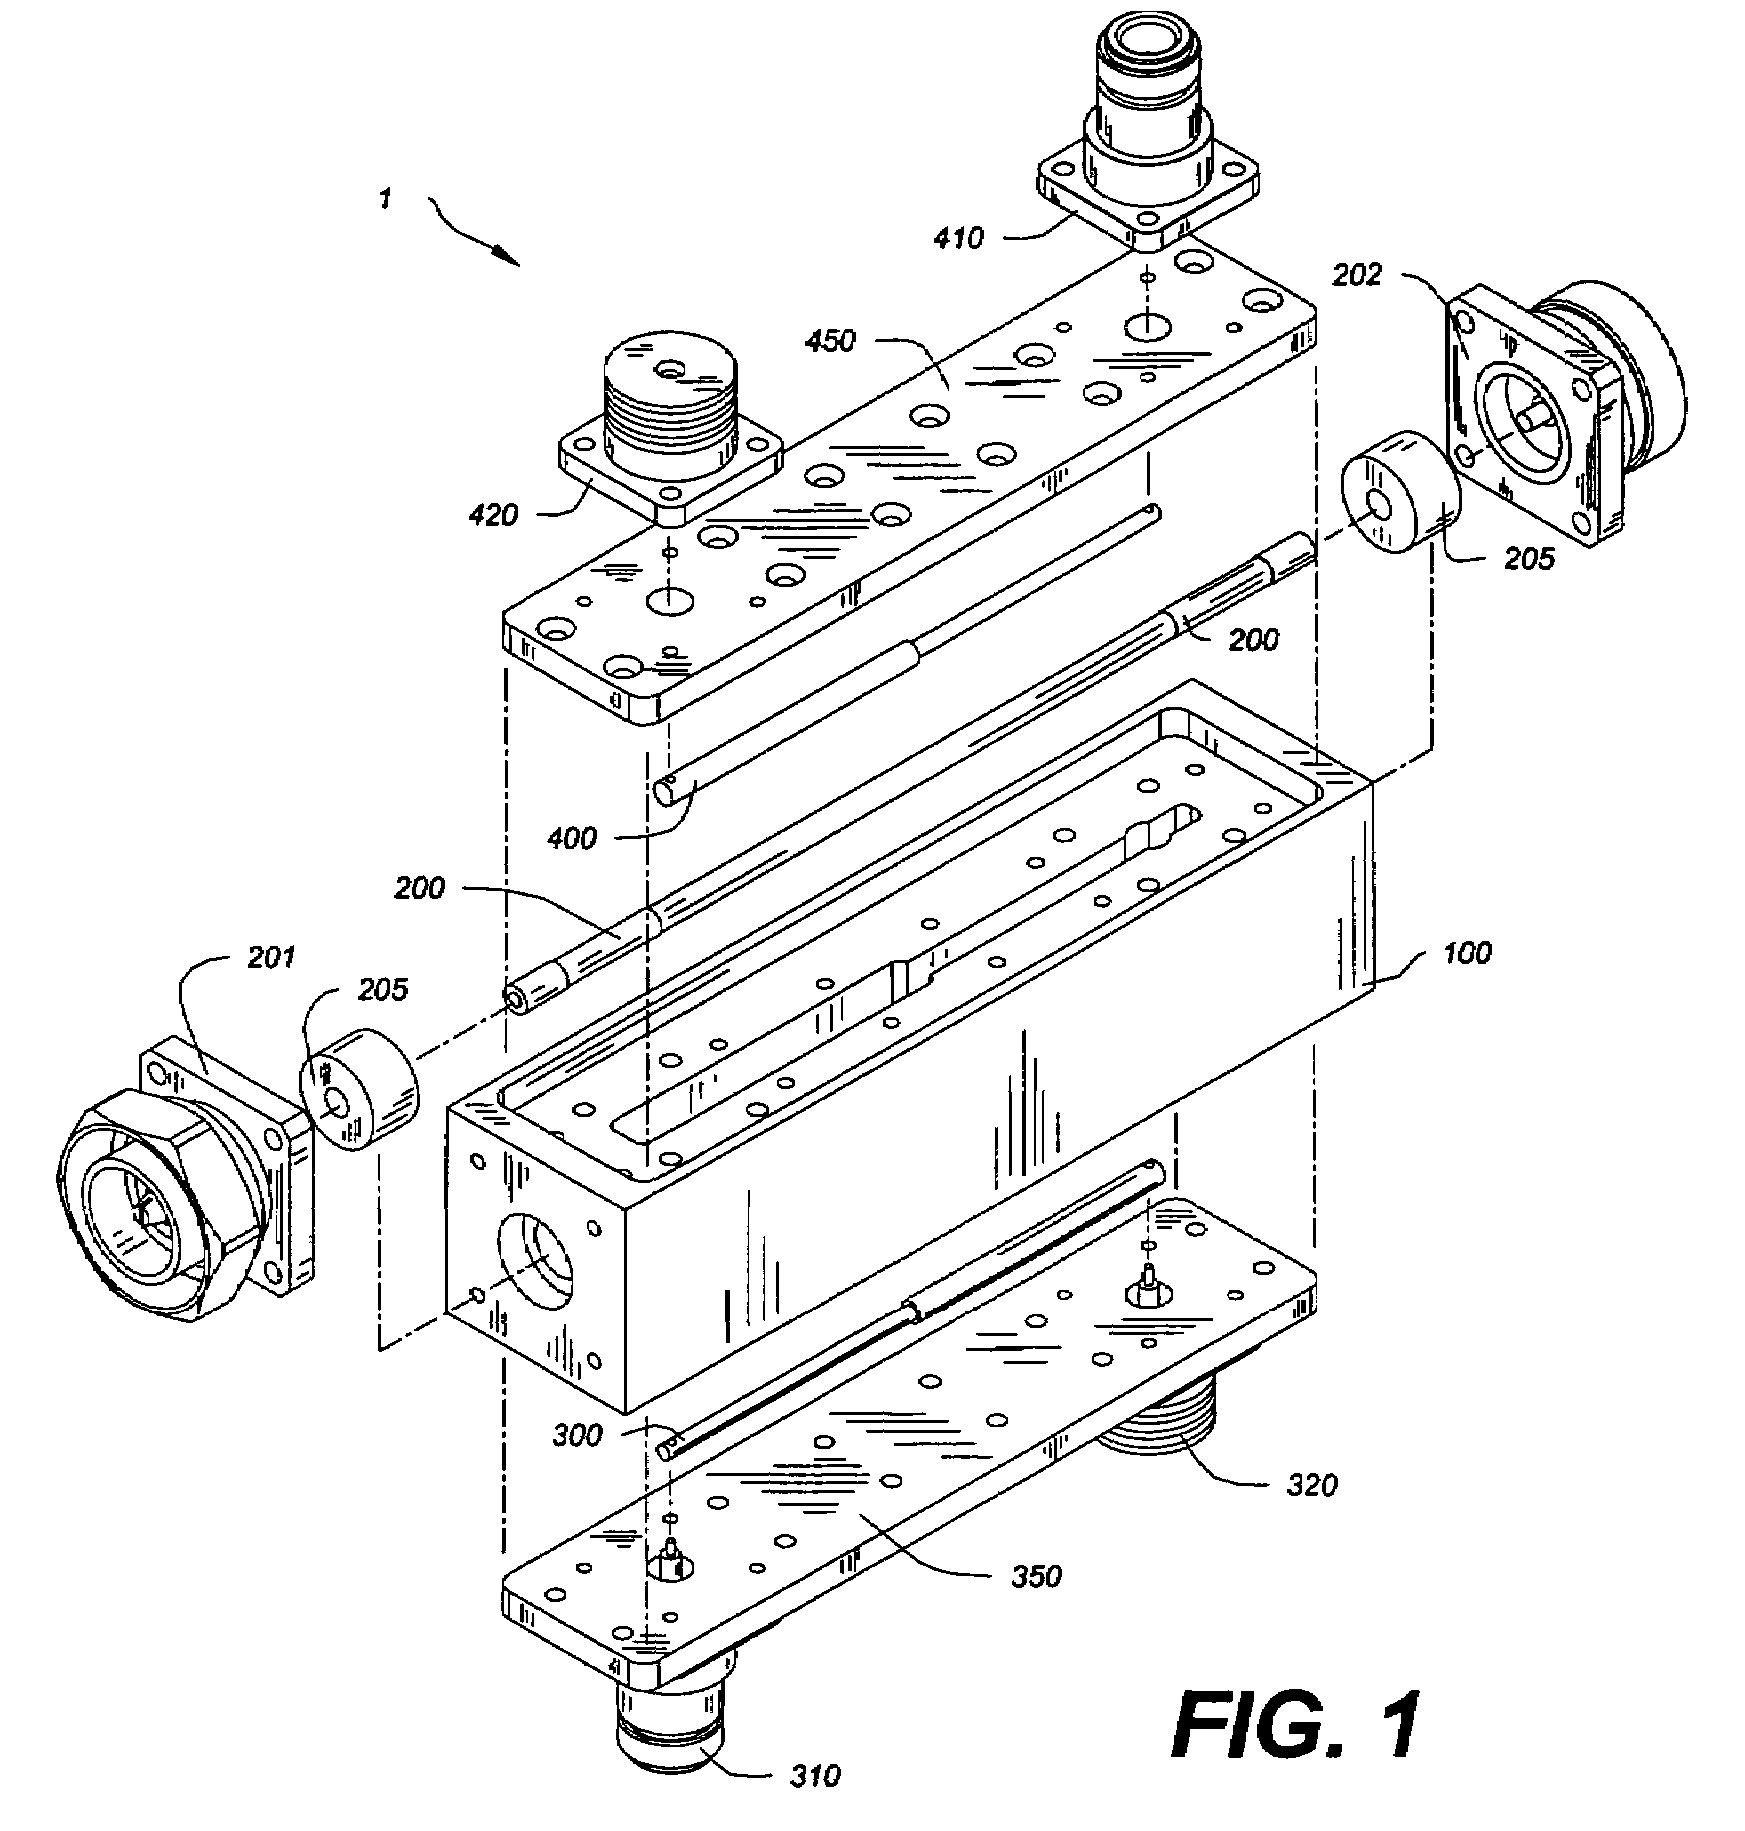 Dual directional coupler with multi-stepped forward and reverse coupling rods